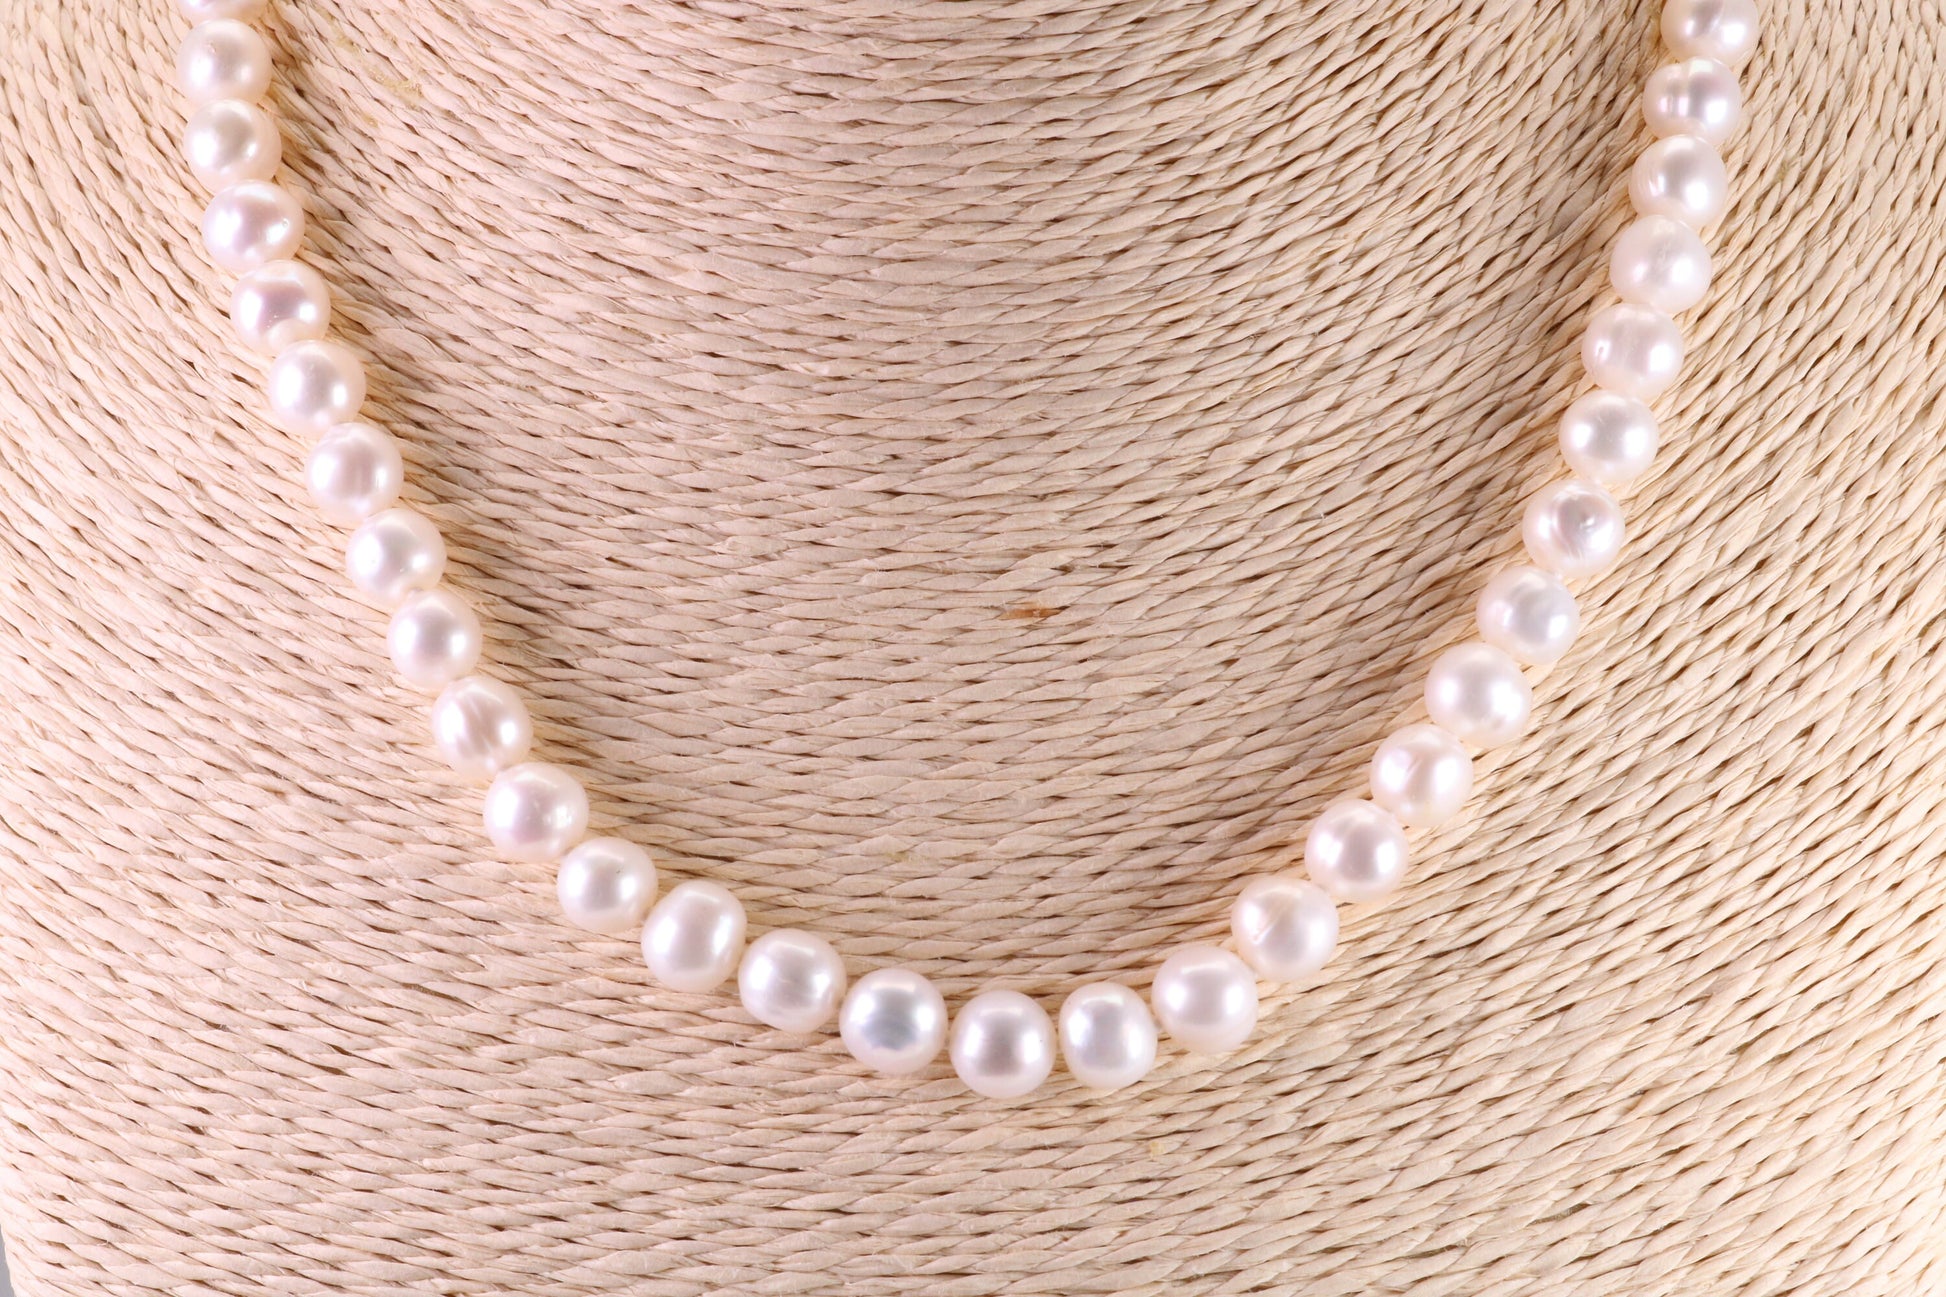 20 Inches Long Single Strand Natural 8 mm Round Pearl Necklace set in Silver